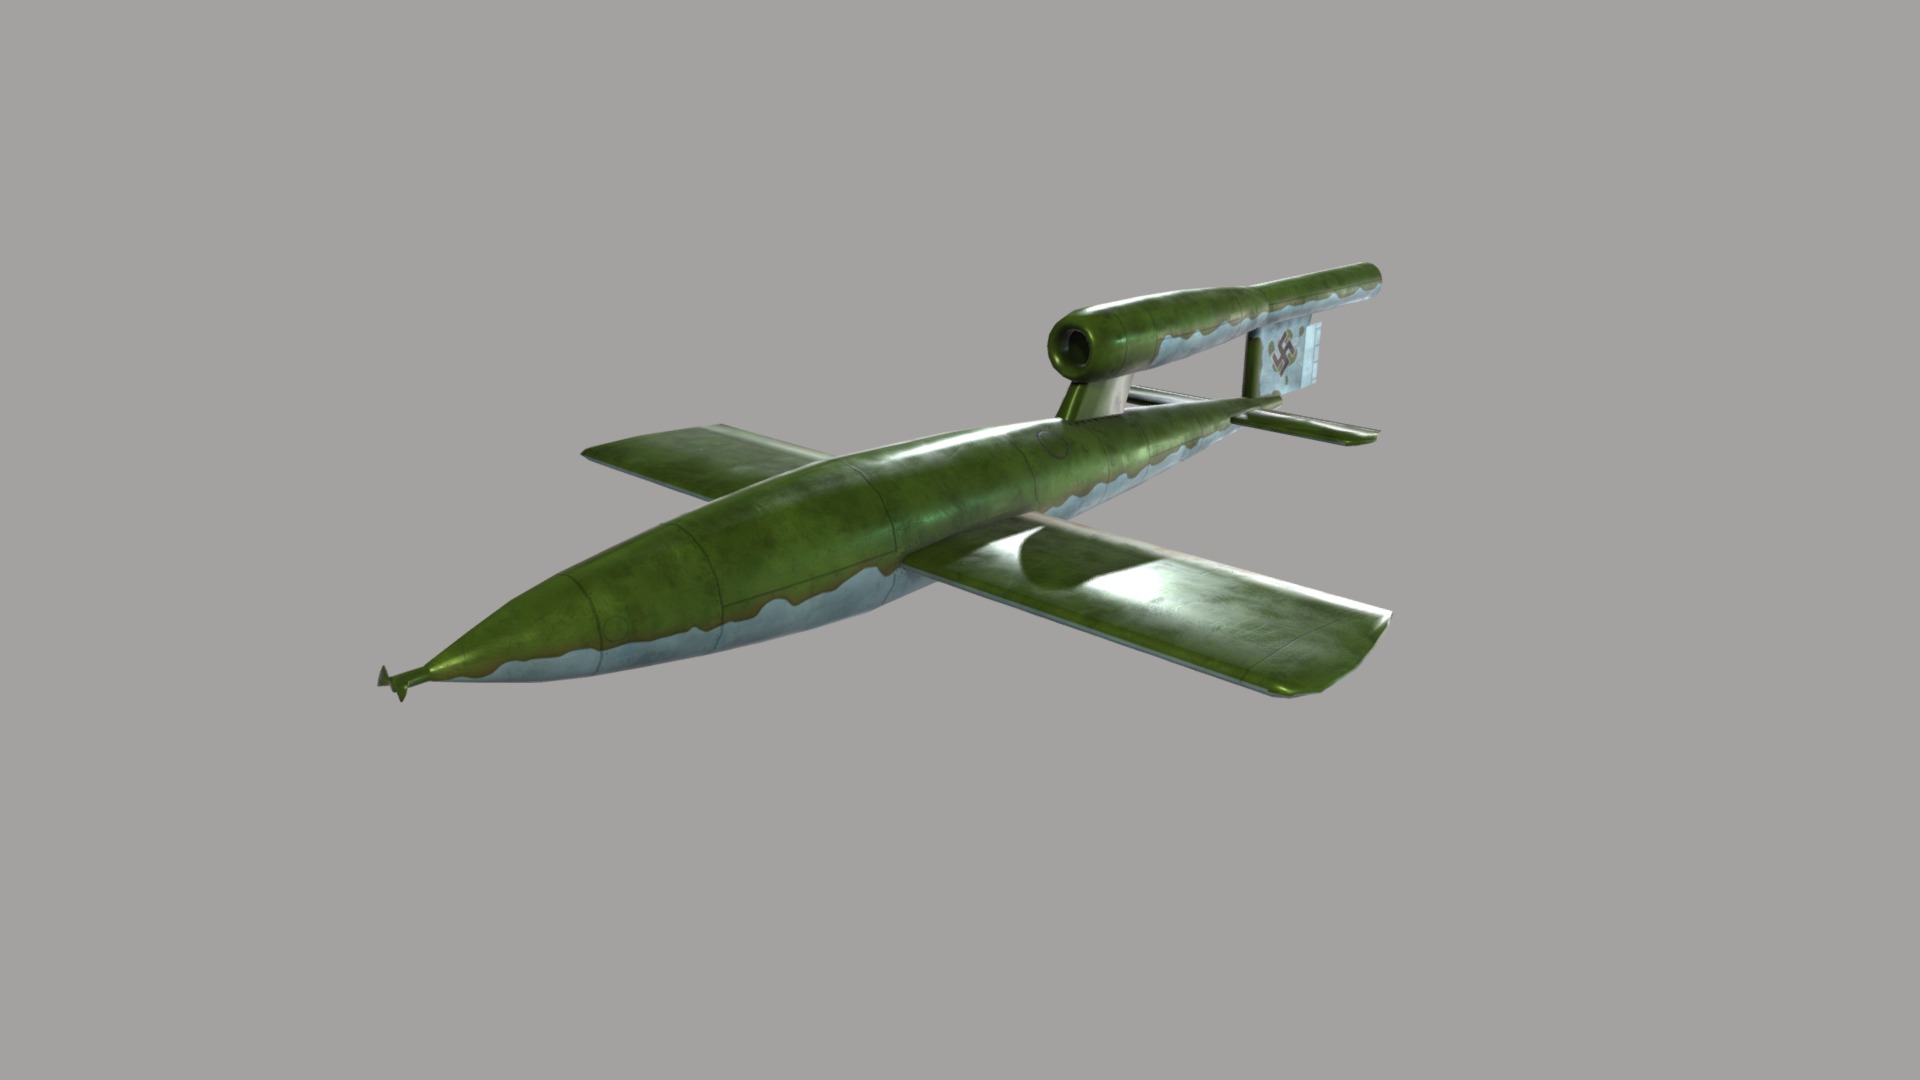 3D model V1 Blend - This is a 3D model of the V1 Blend. The 3D model is about a green model airplane.